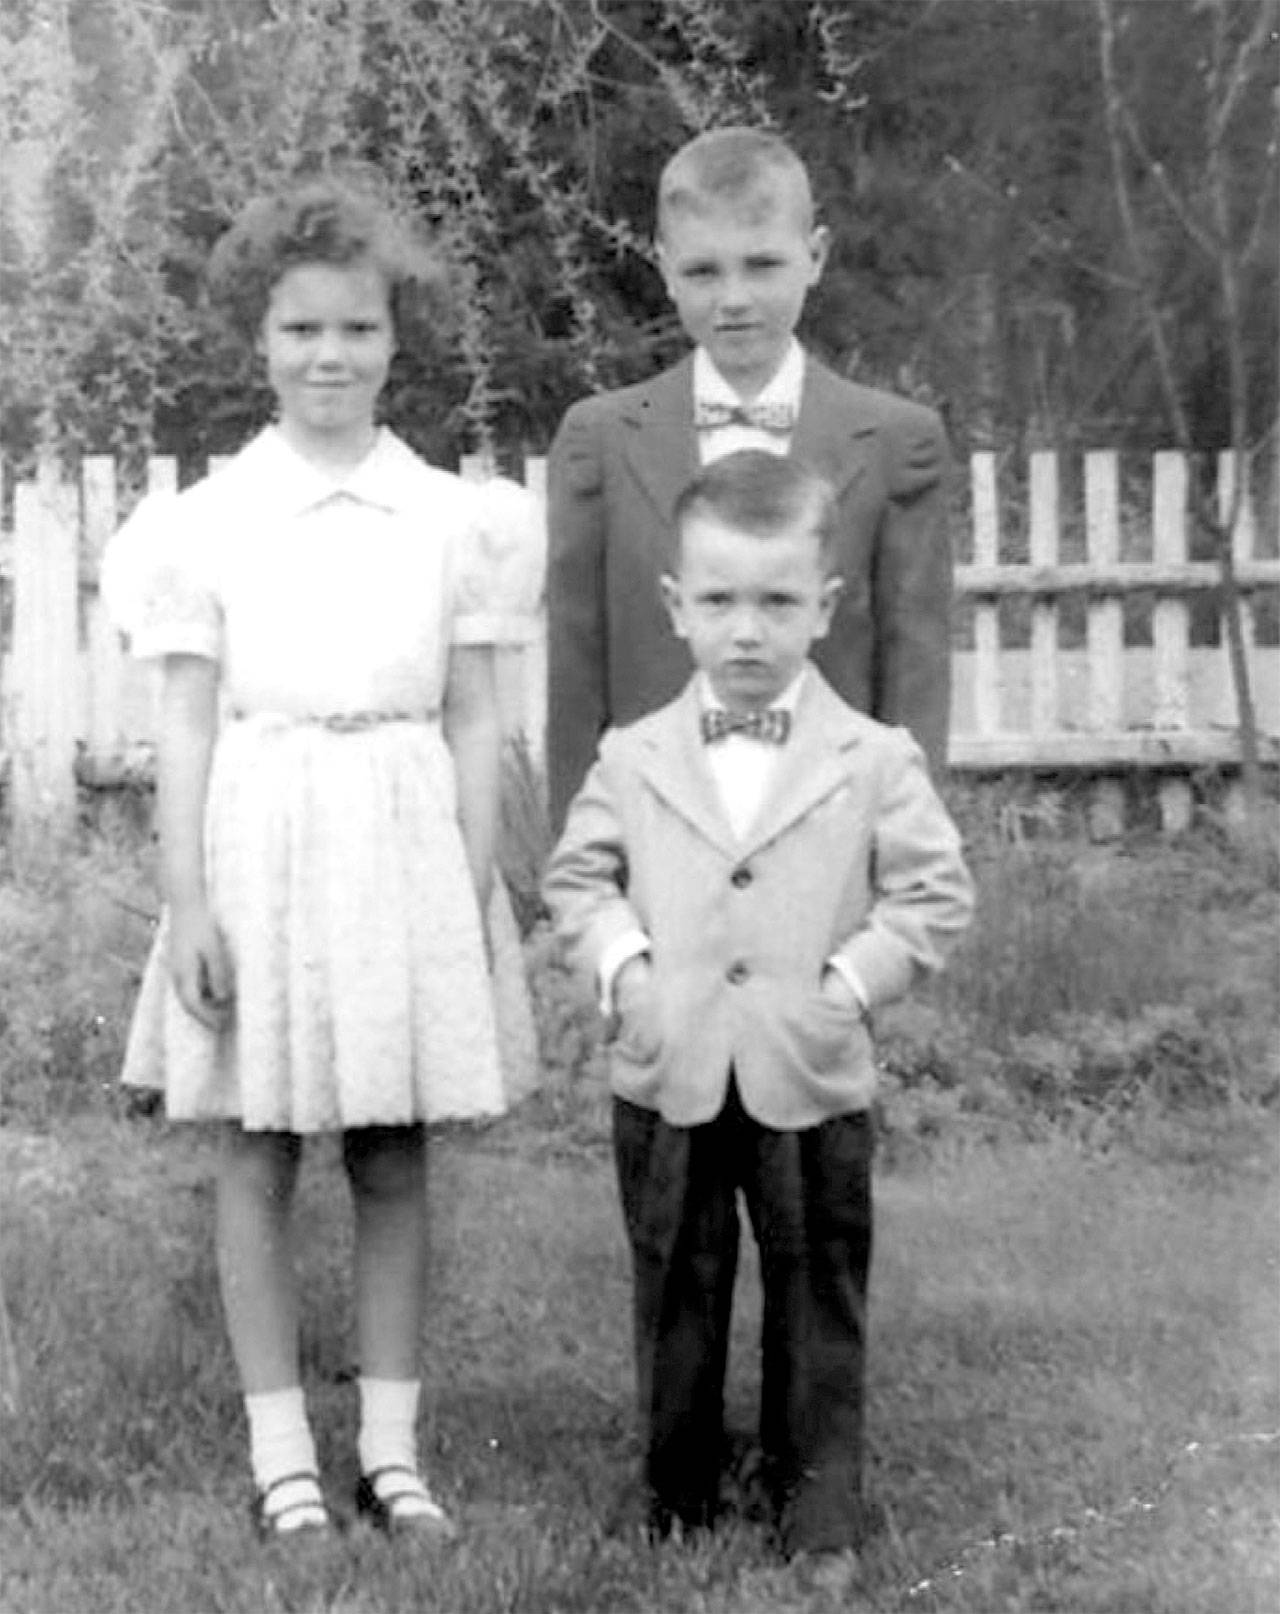 A young Greg Reynolds poses in front of his older siblings for an Easter photo.